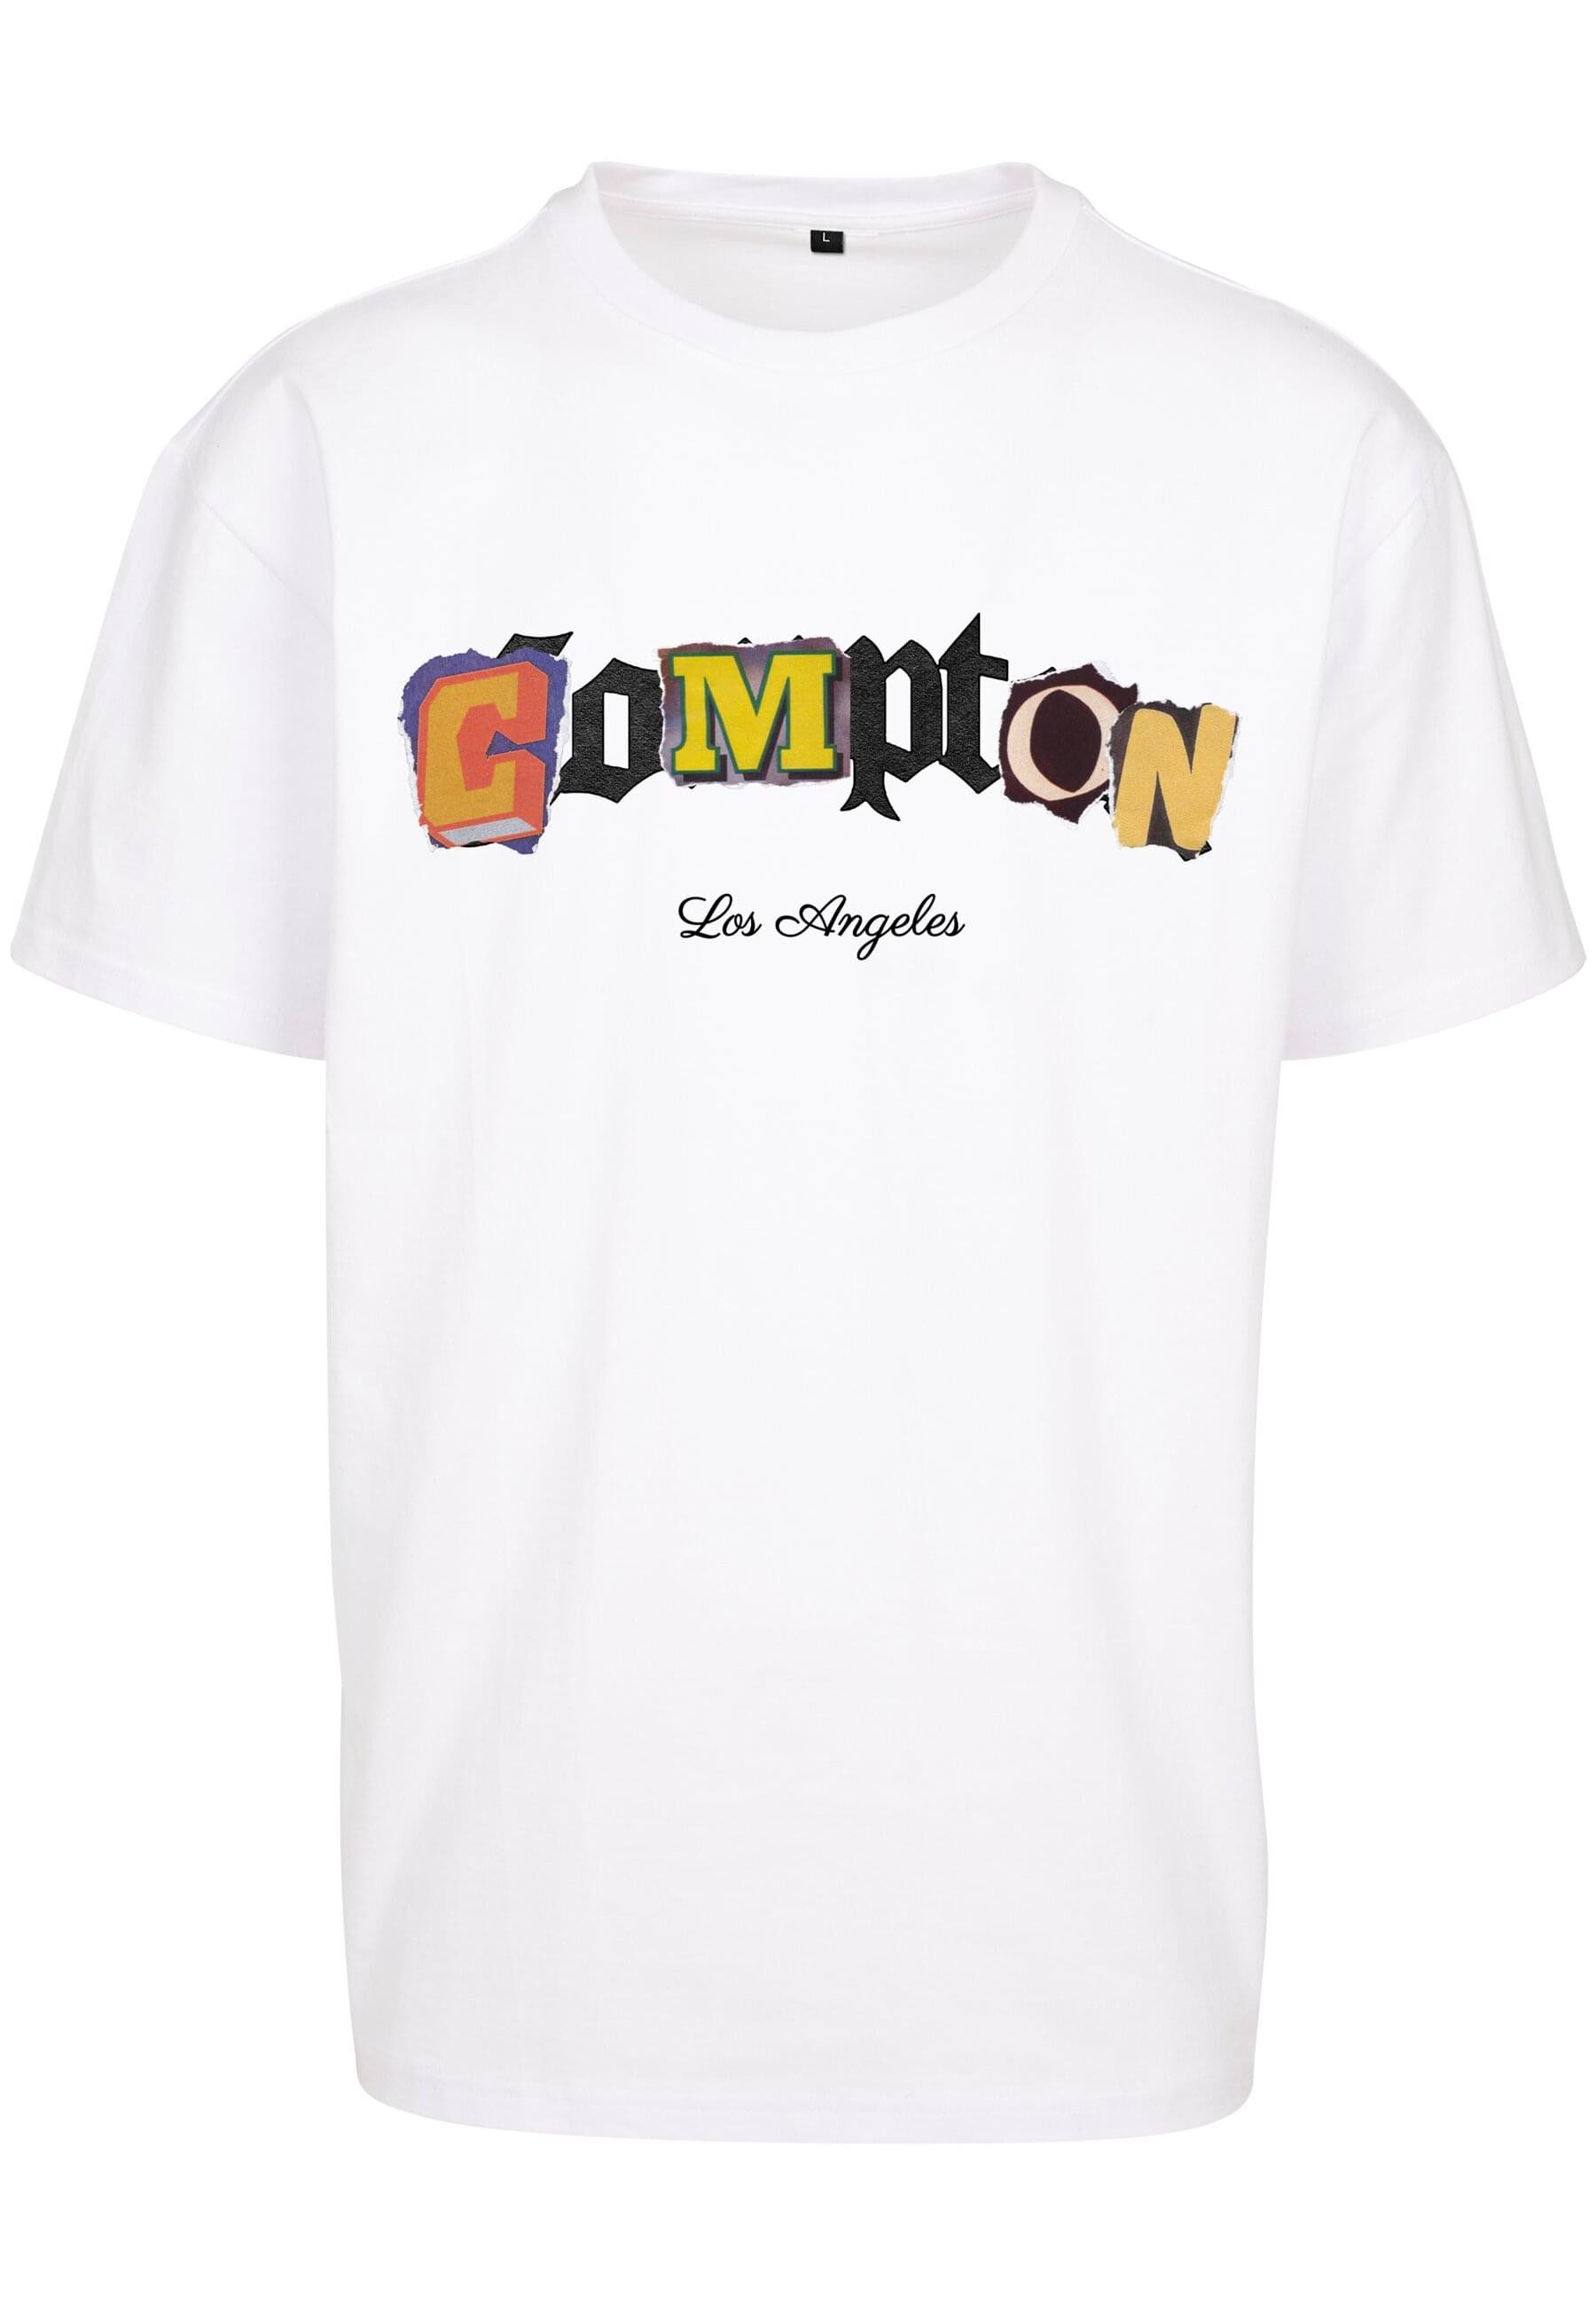 Upscale by Mister Tee T-Shirt Upscale by Mister Tee Unisex Compton L.A. Oversize Tee (1-tlg)